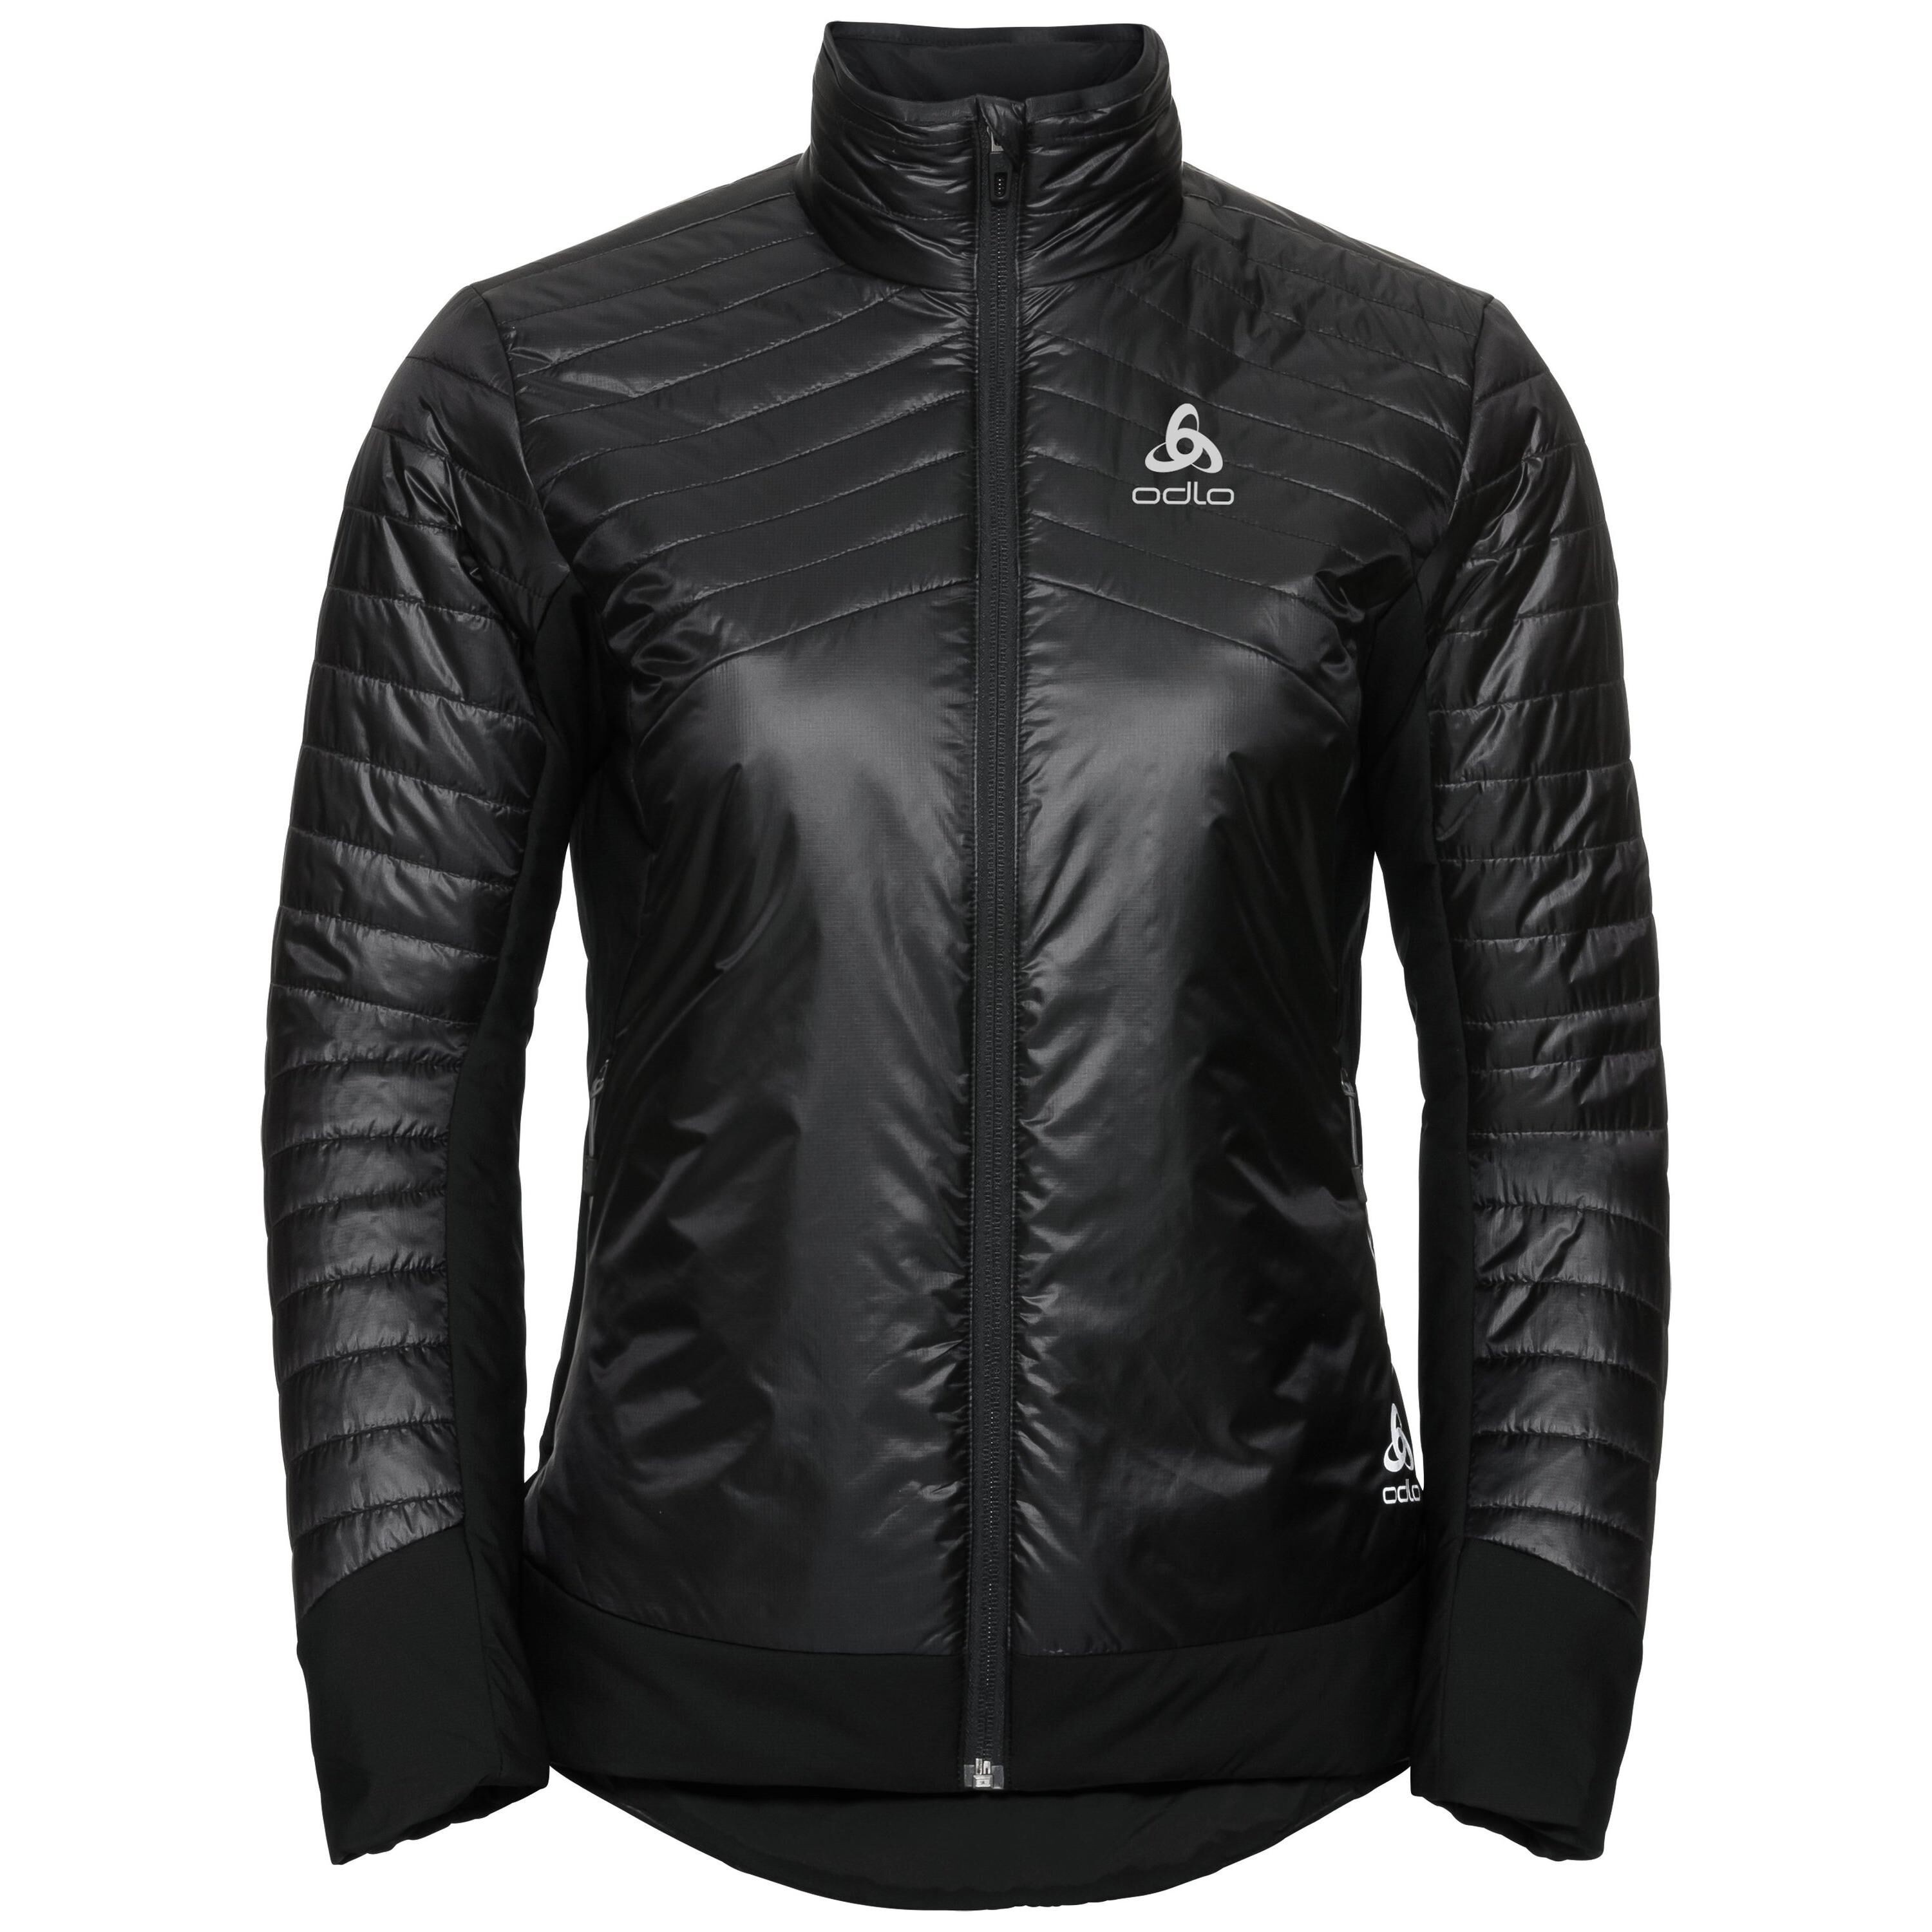 Odlo Jacket Insulated Cocoon S-Thermic Light - Synthetic jacket - Women's